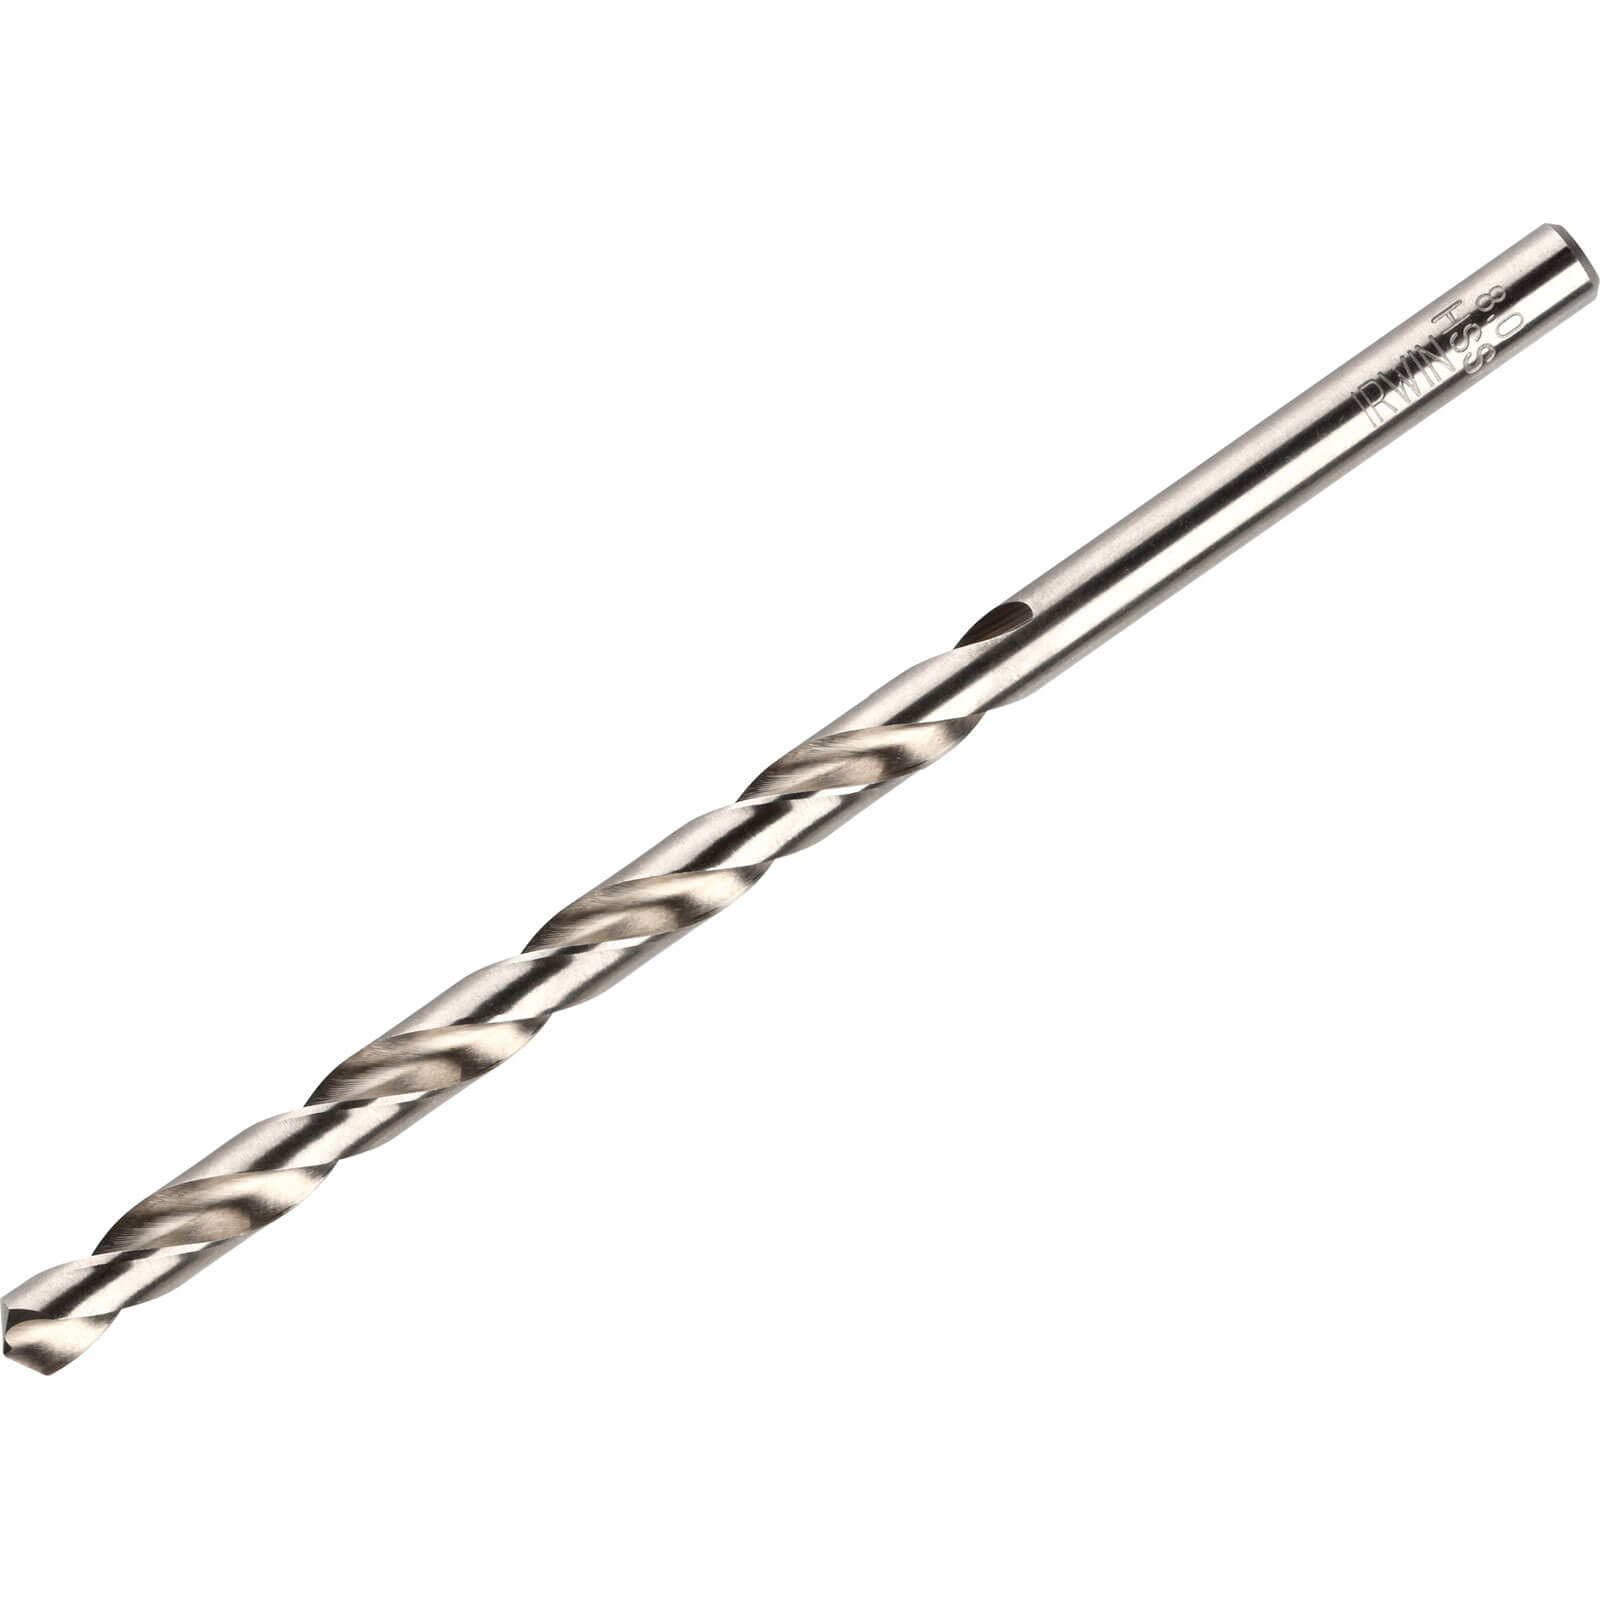 Photo of Irwin Hss Long Pro Drill Bits 10mm Pack Of 5